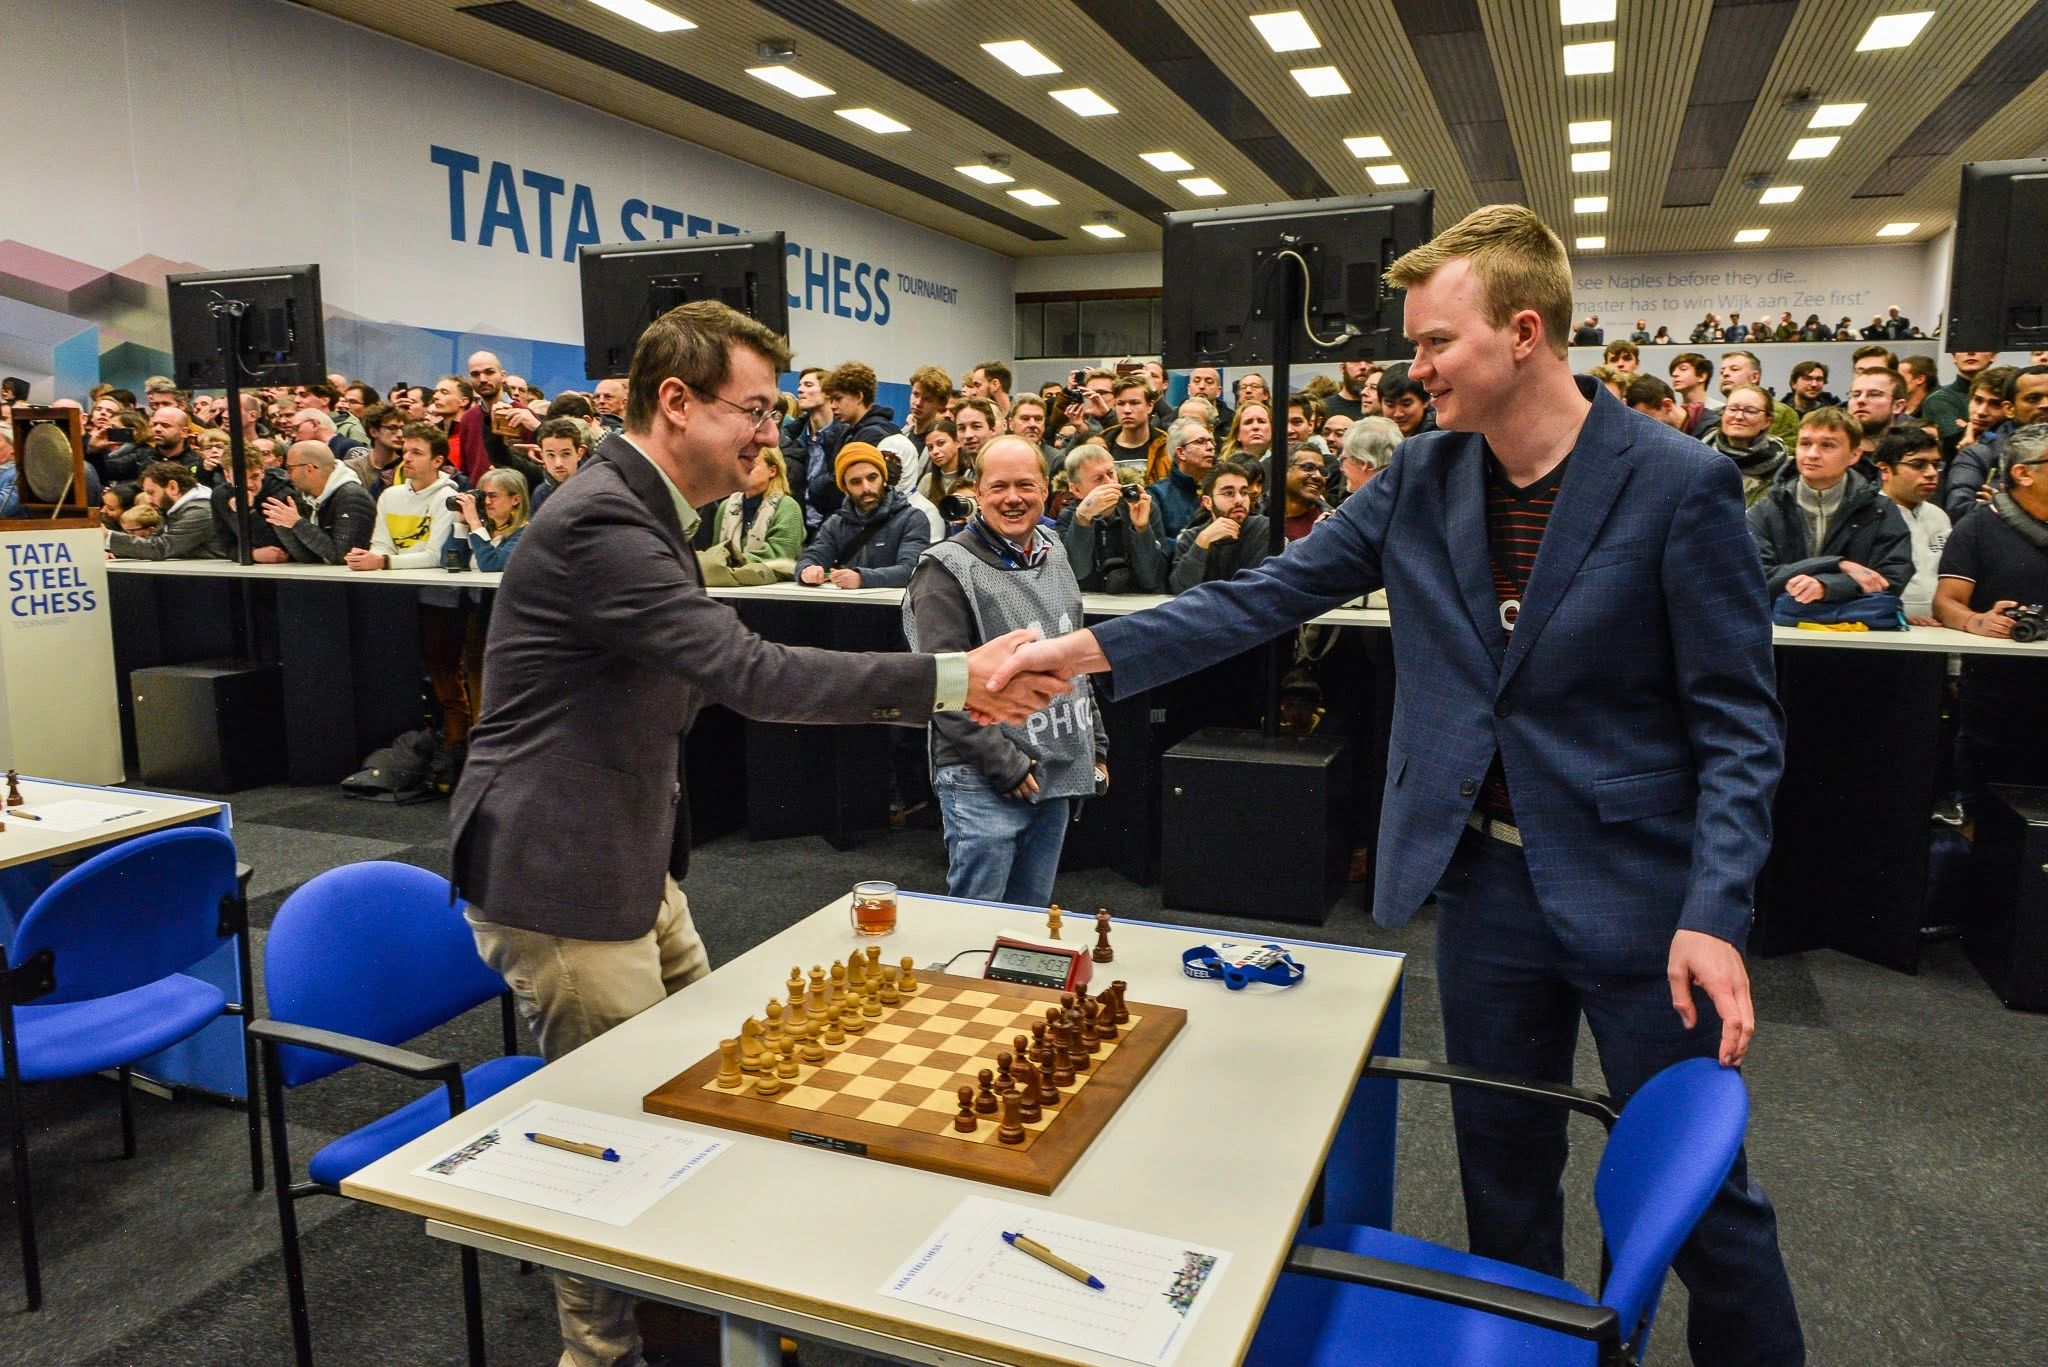 Tata Steel, Chess Boom and Pro Chess League